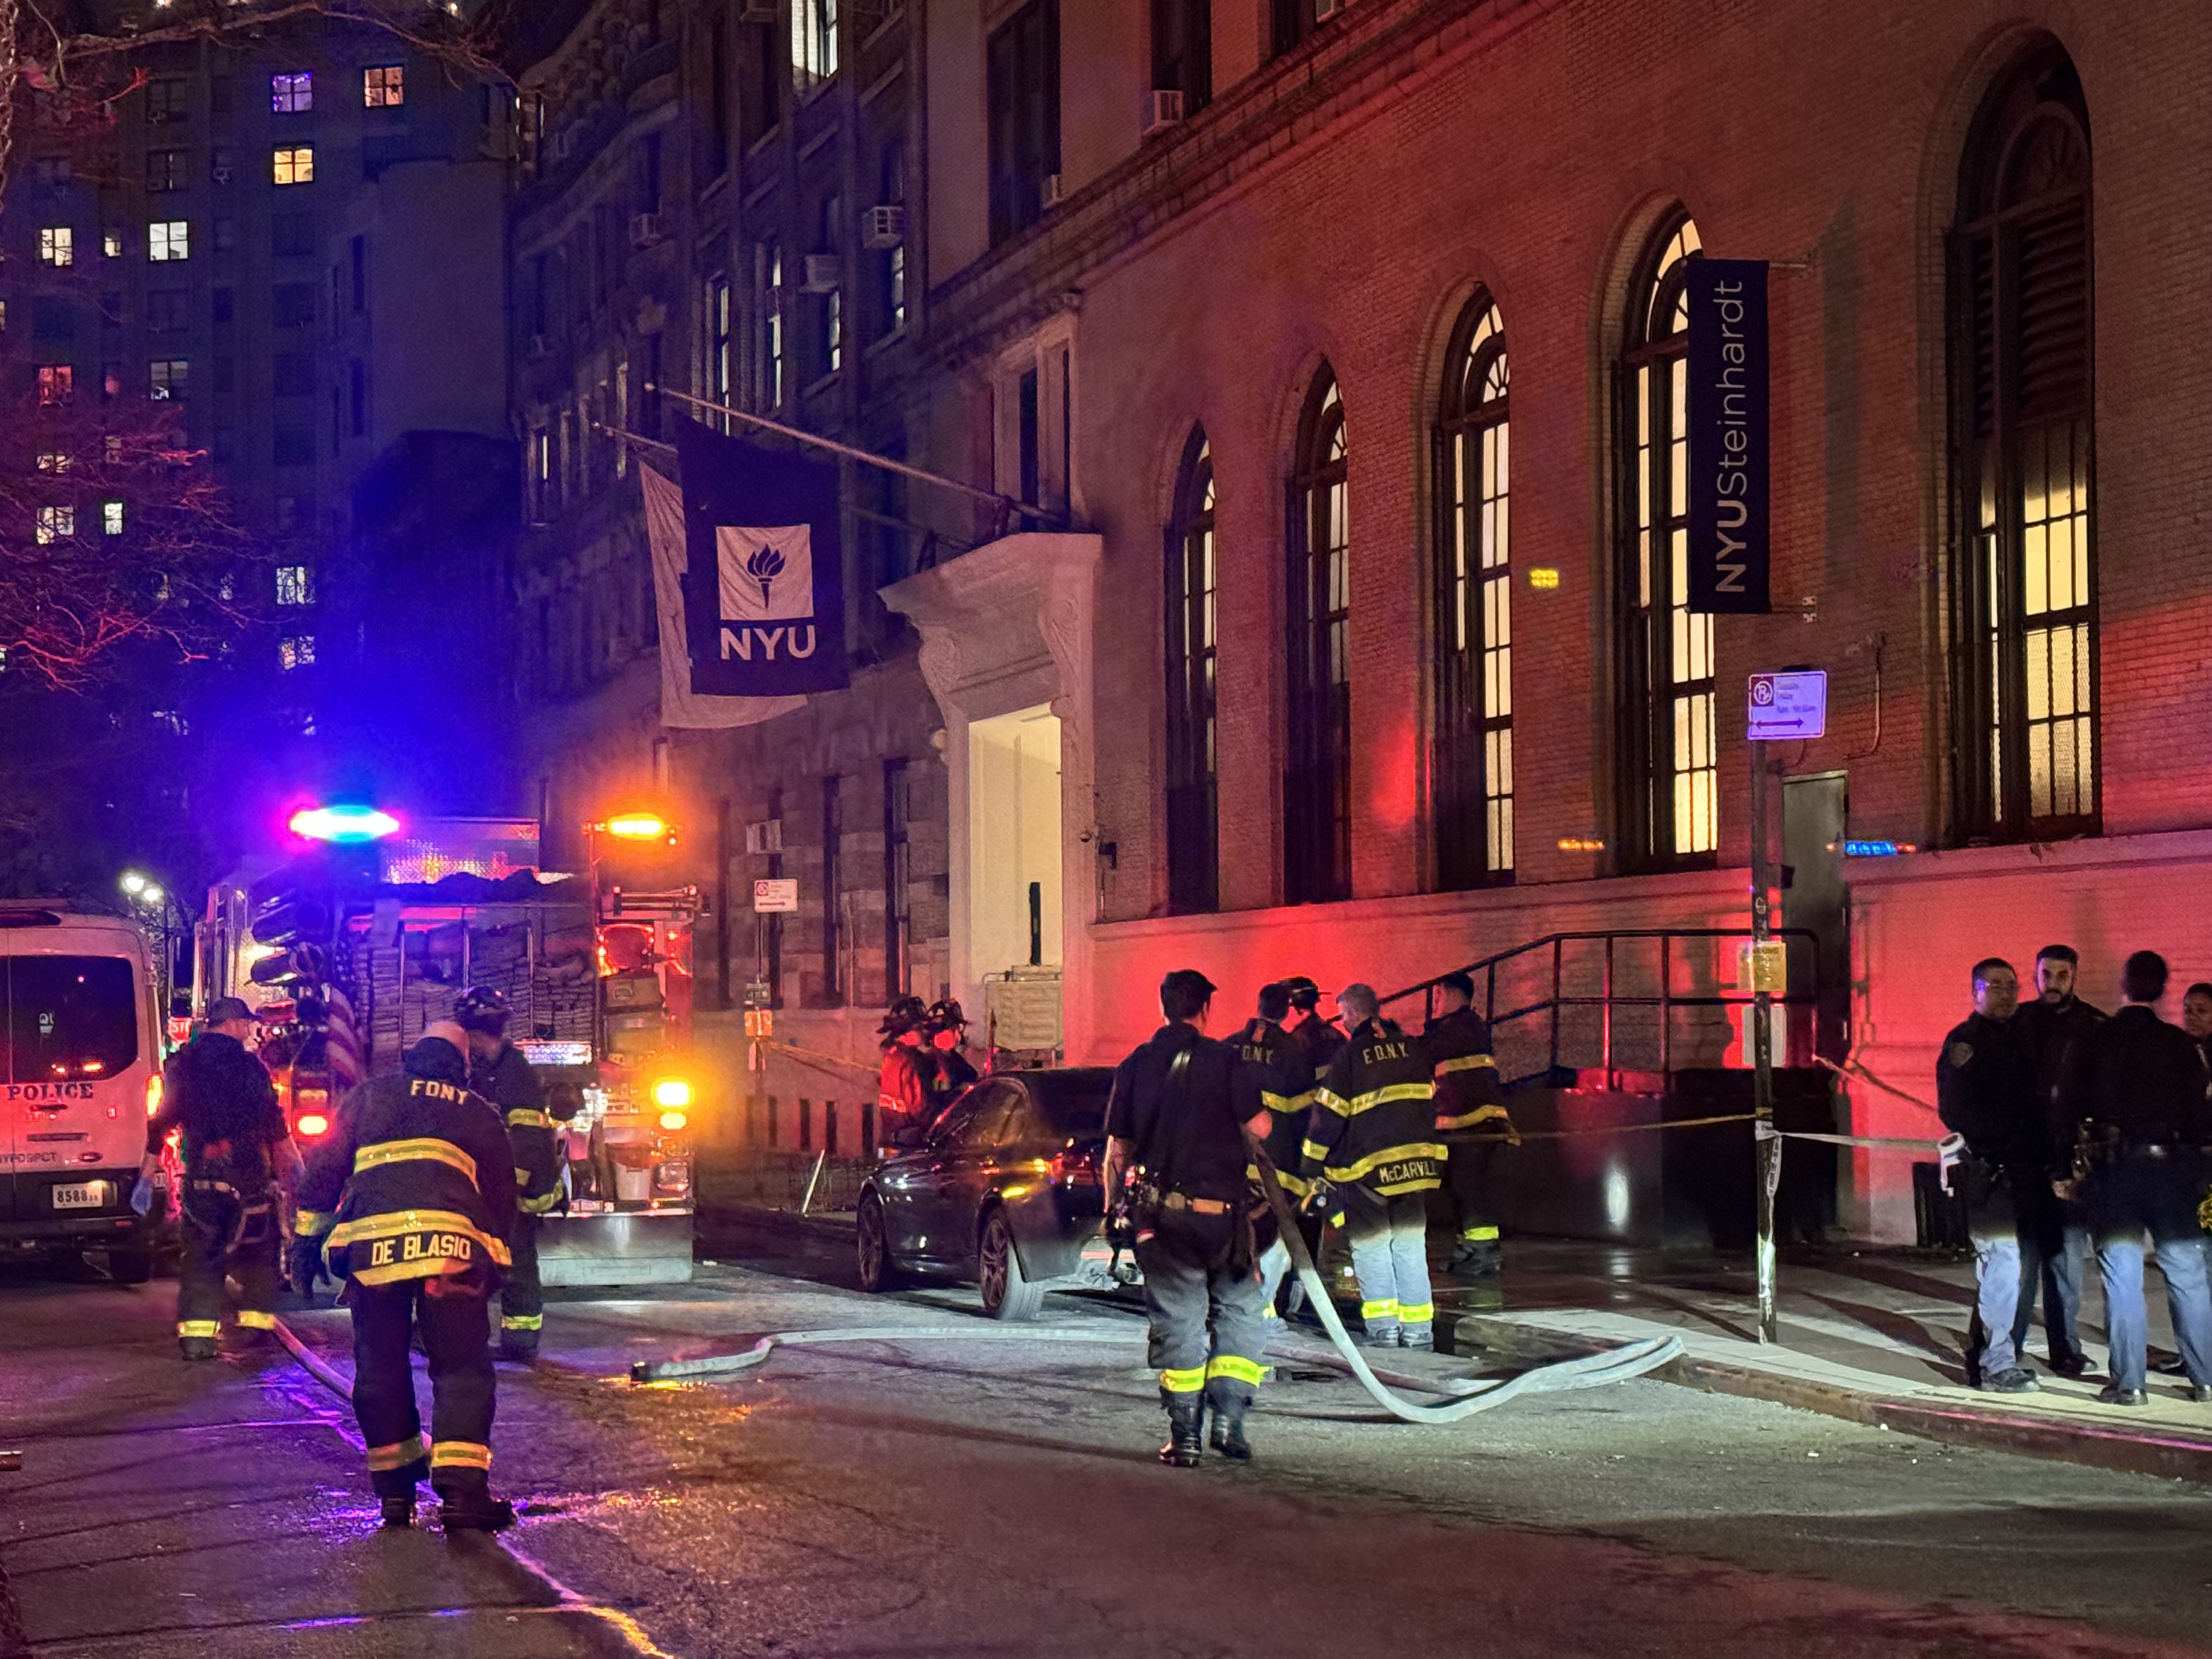 Officers responding to the scene of the suicide at NYU on Saturday night. It remains unclear if the victim was a student